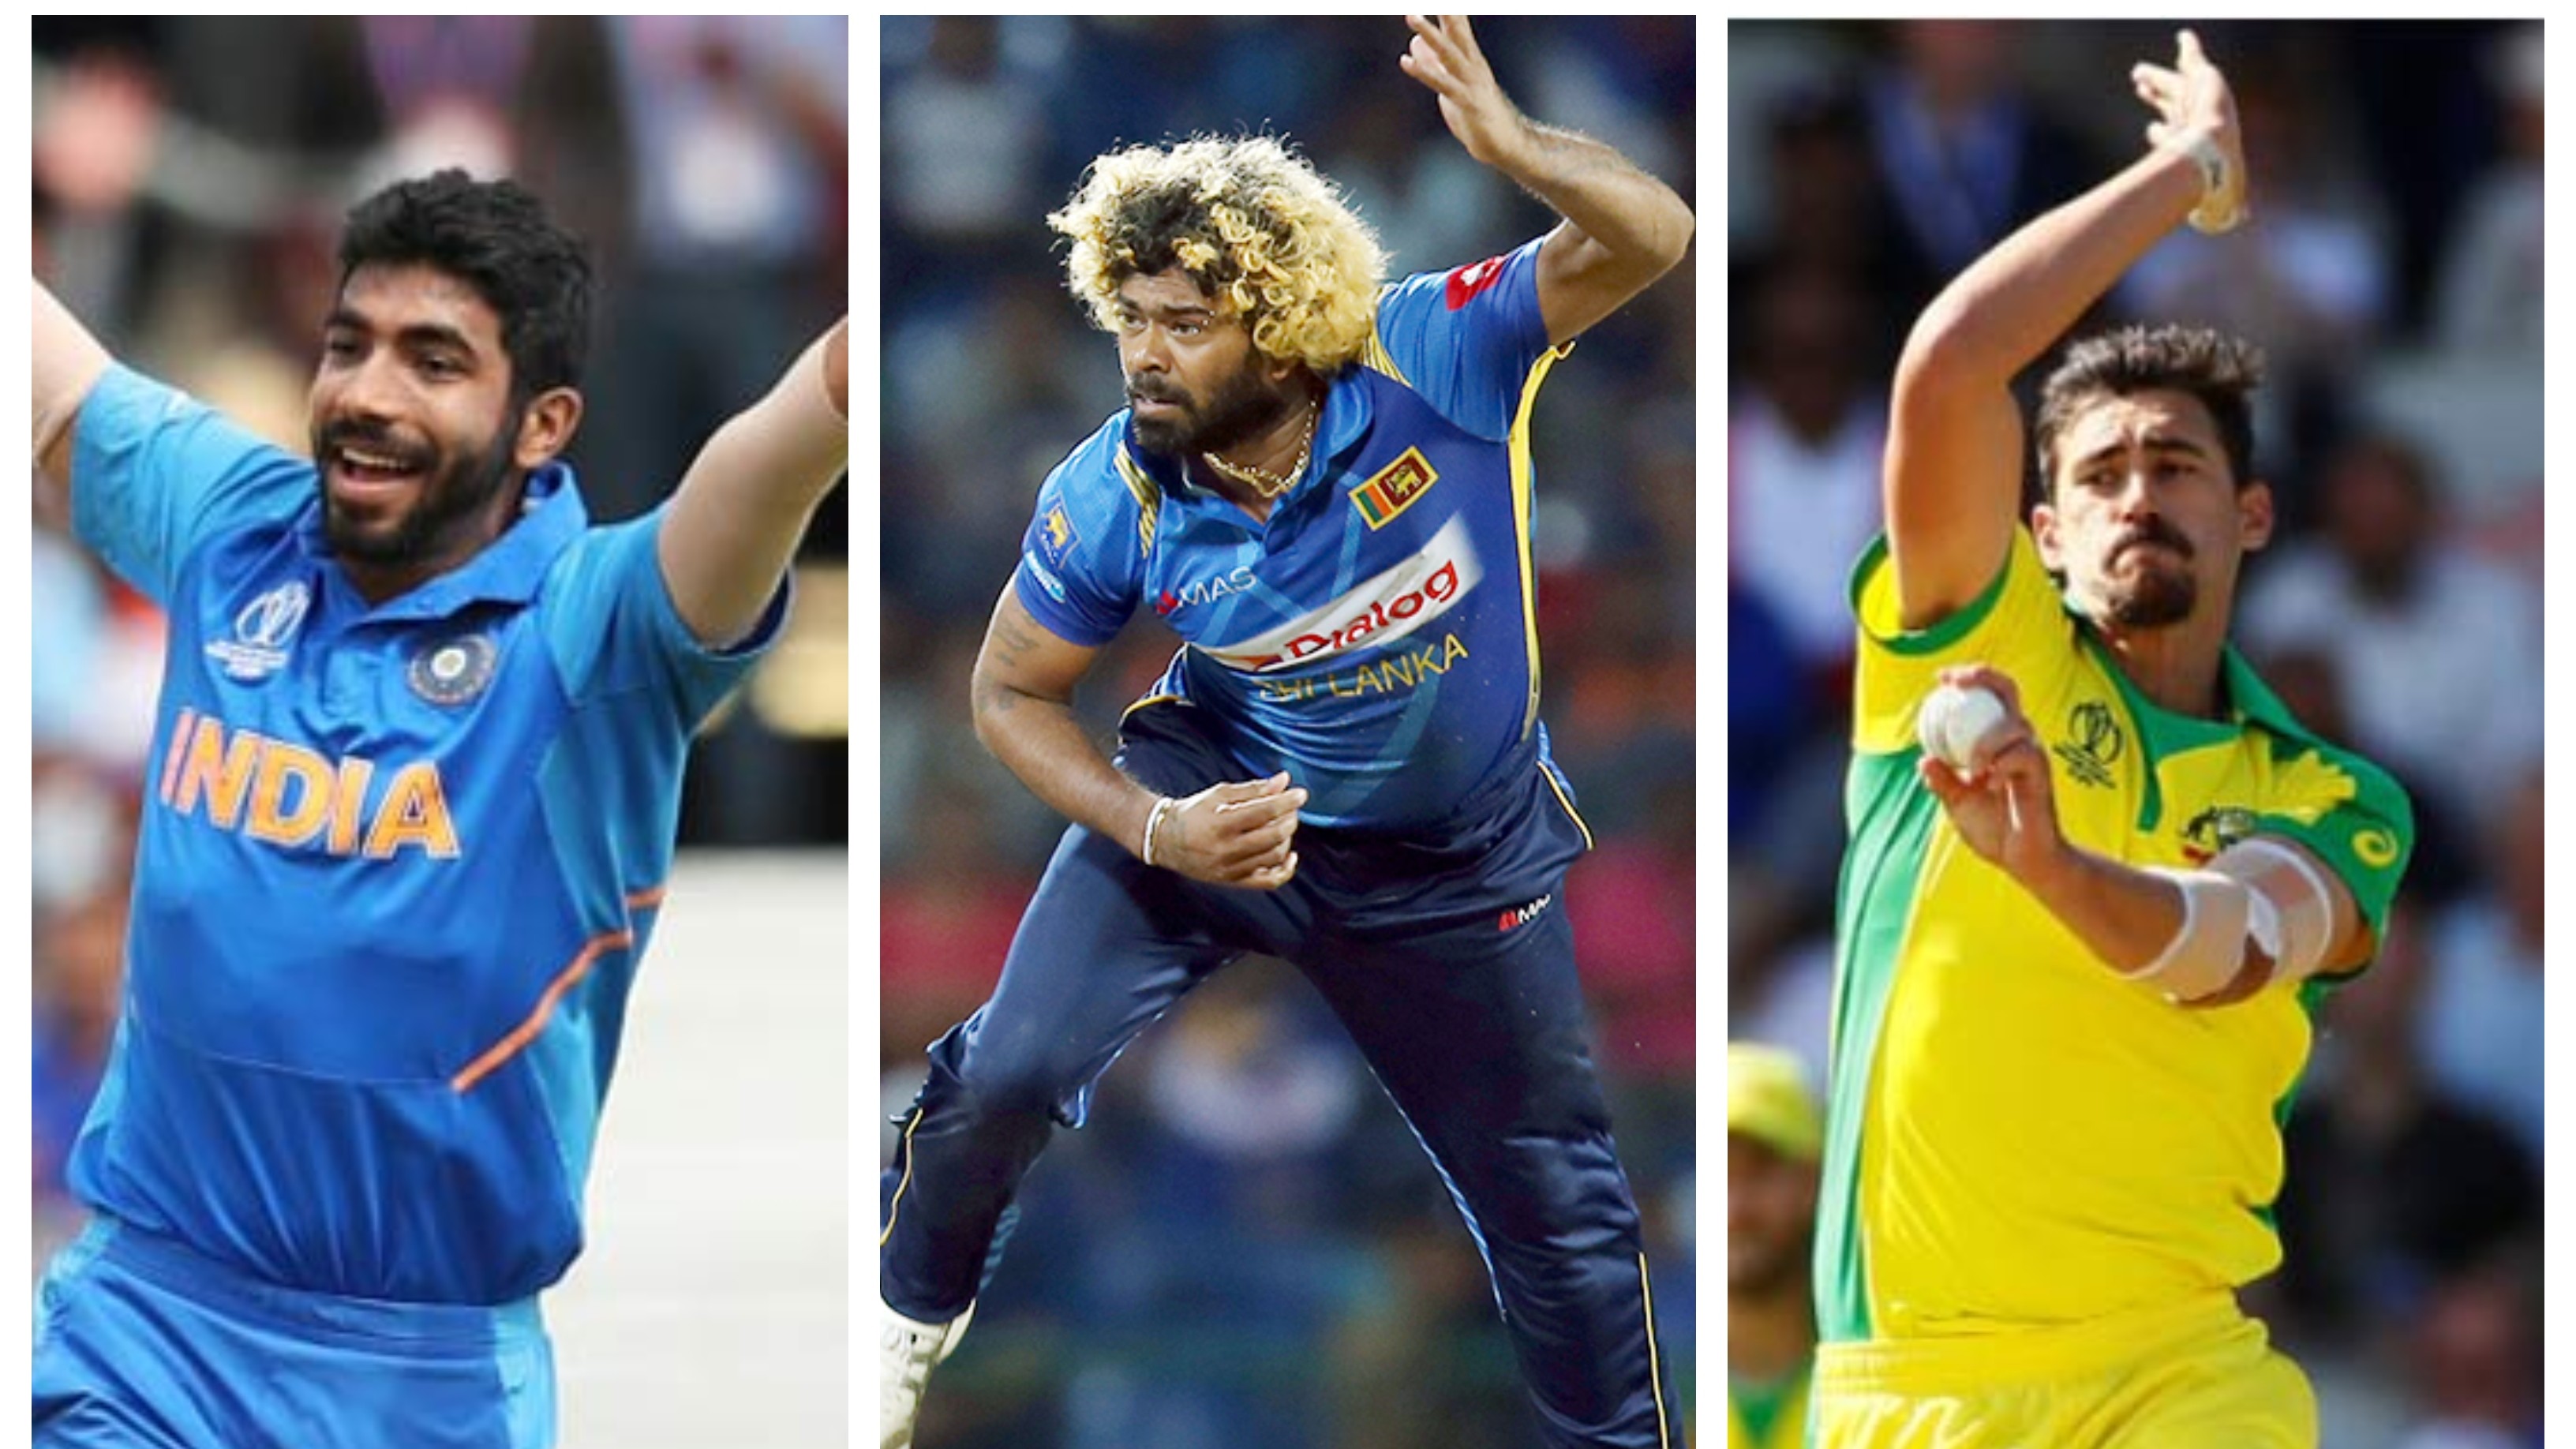 WATCH - Aakash Chopra gives his verdict on best bowler in Super Over among Bumrah, Malinga and Starc